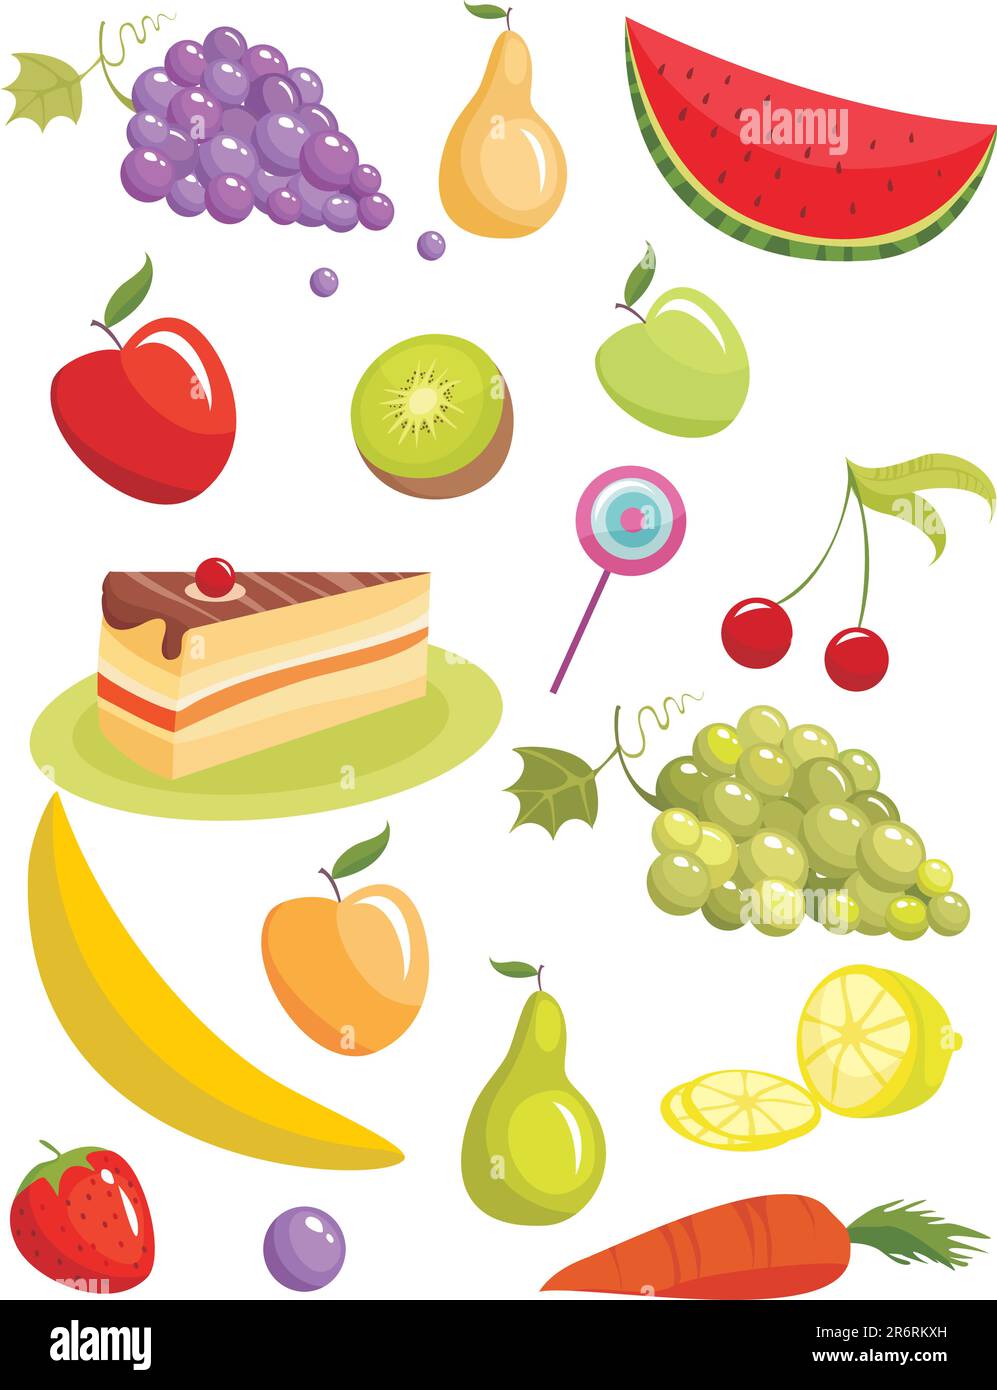 vector illustration set of a different fruits and sweeties Stock Vector